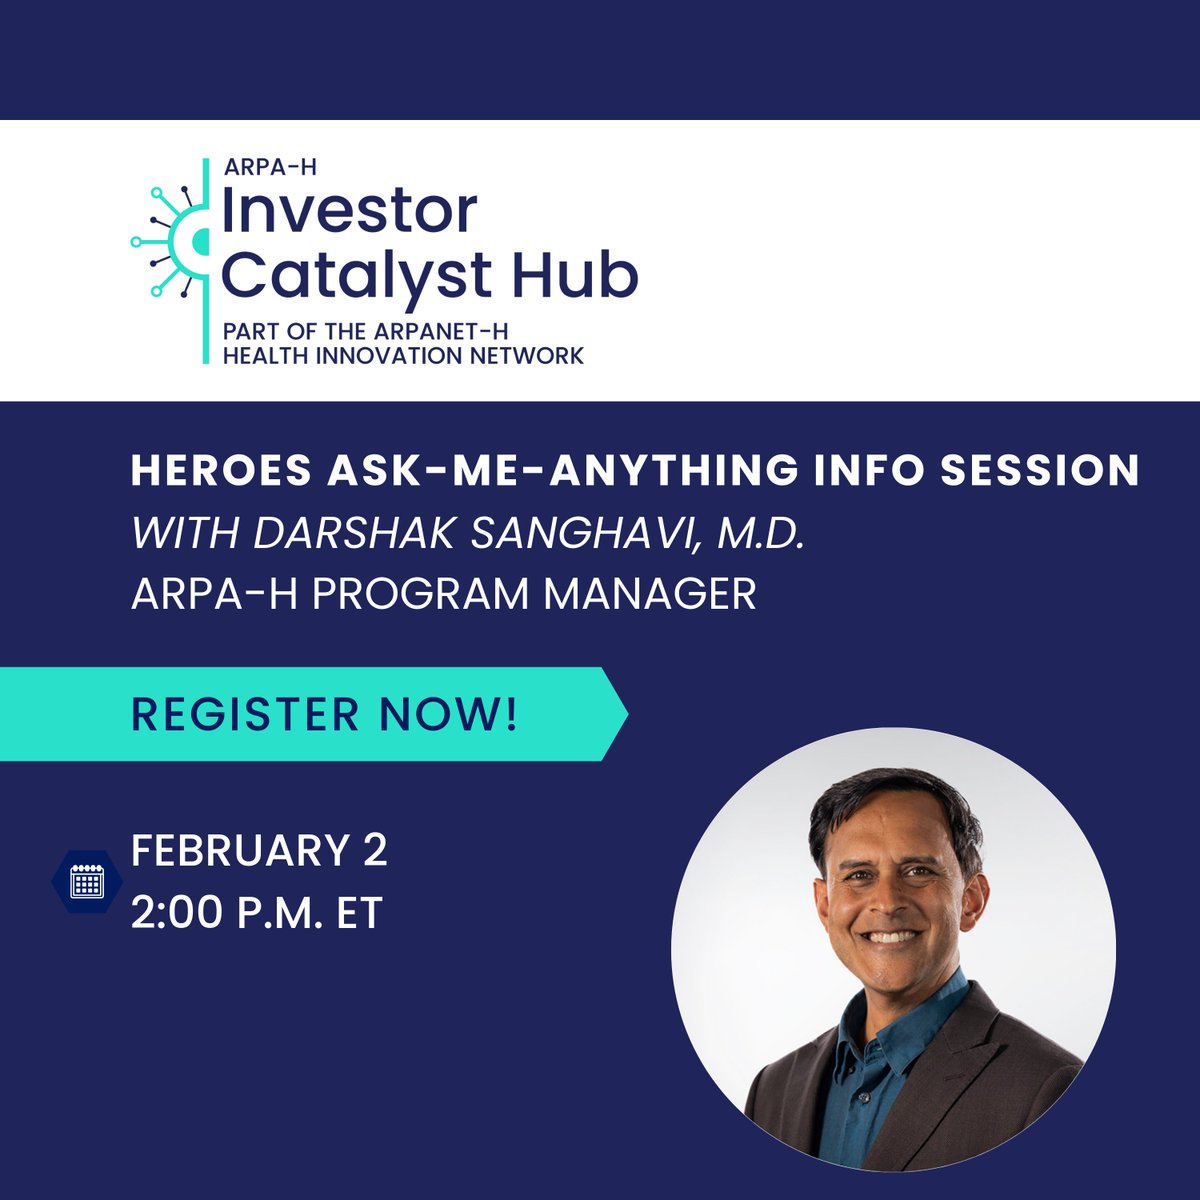 Join us for the #ARPAH #HEROES AMA webinar on February 2, presented by ARPA-H Program Manager Darshak Sanghavi, M.D. investorcatalysthub.swoogo.com/HEROES_info_se… Potential discussion topics include program objectives, milestones, and funding and engagement opportunities. @ARPA_H @arpa_Hdirector